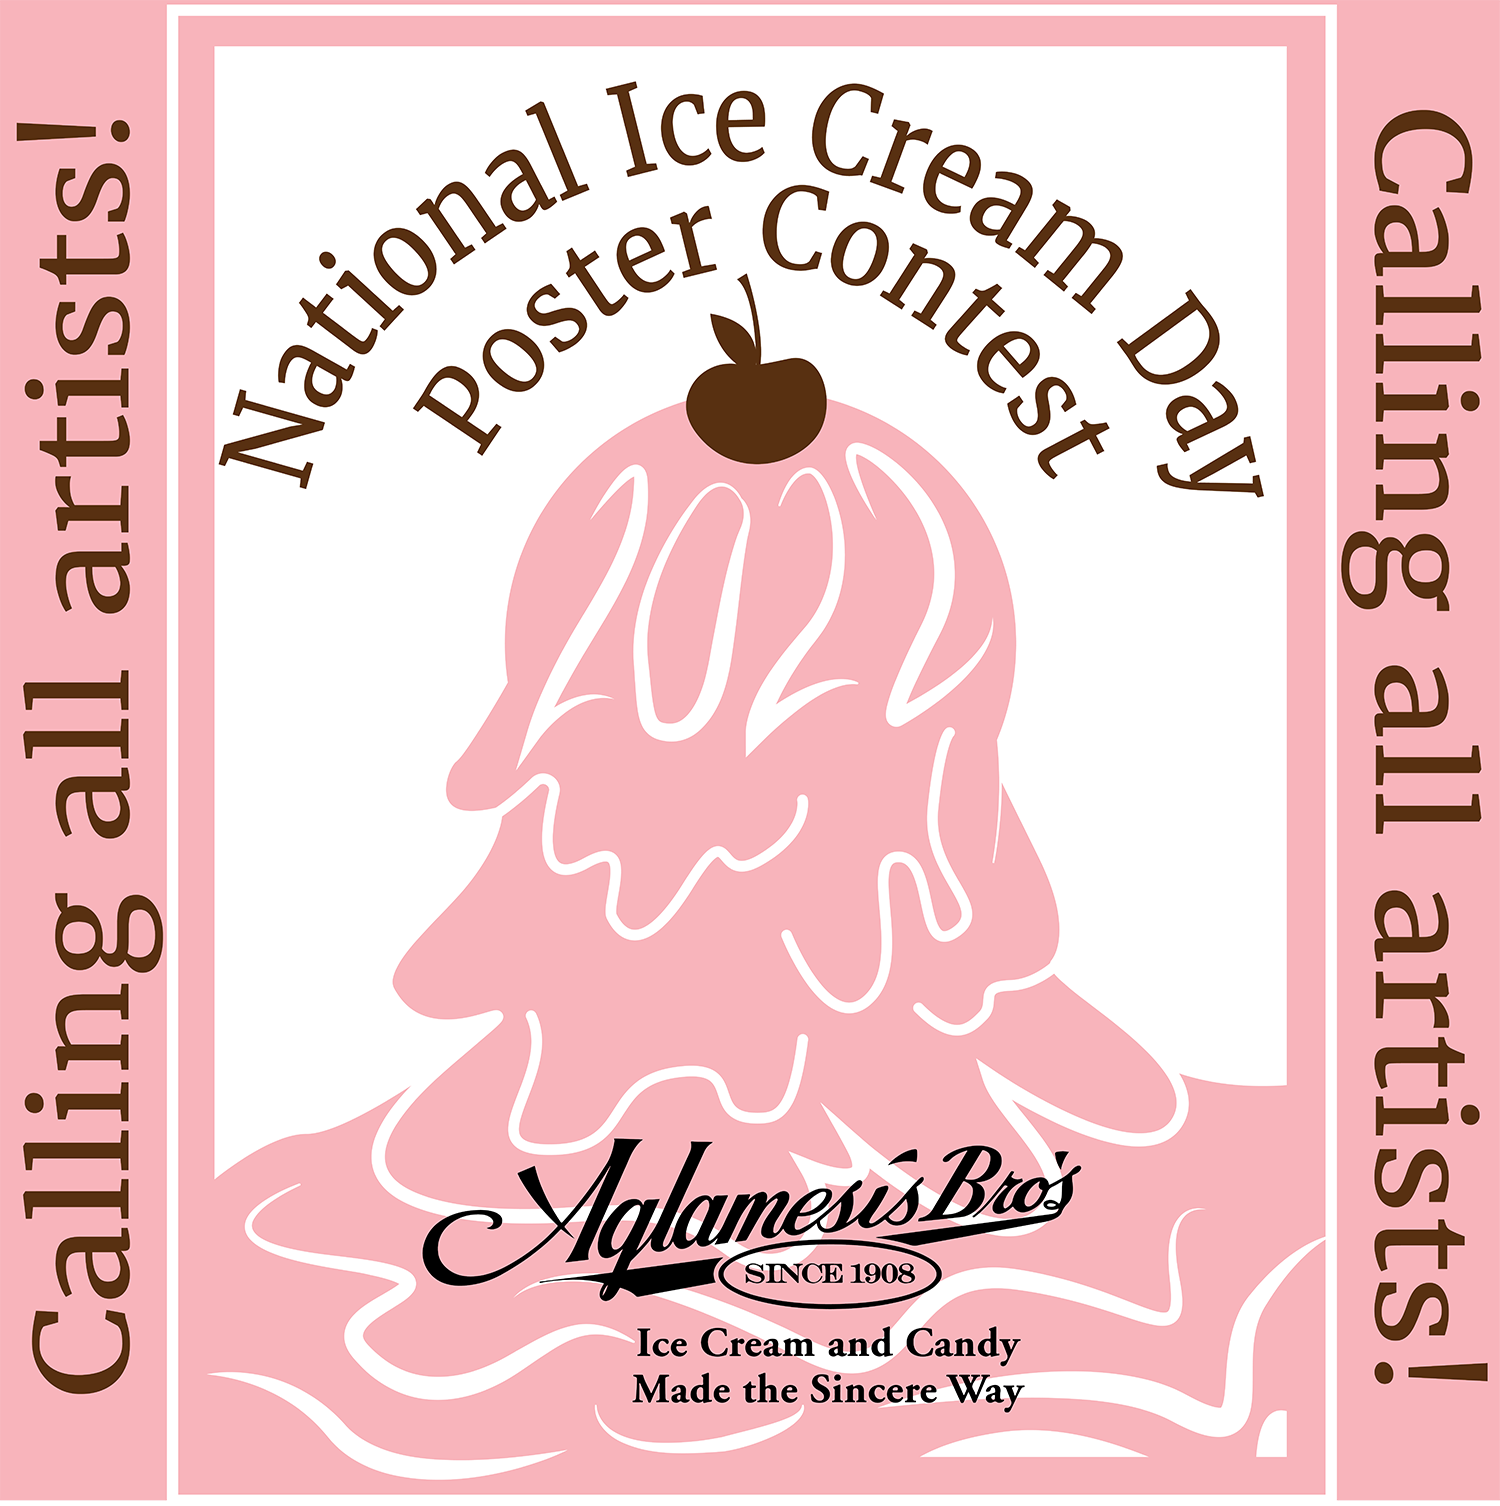 National Ice Cream Day Poster Contest - 2022